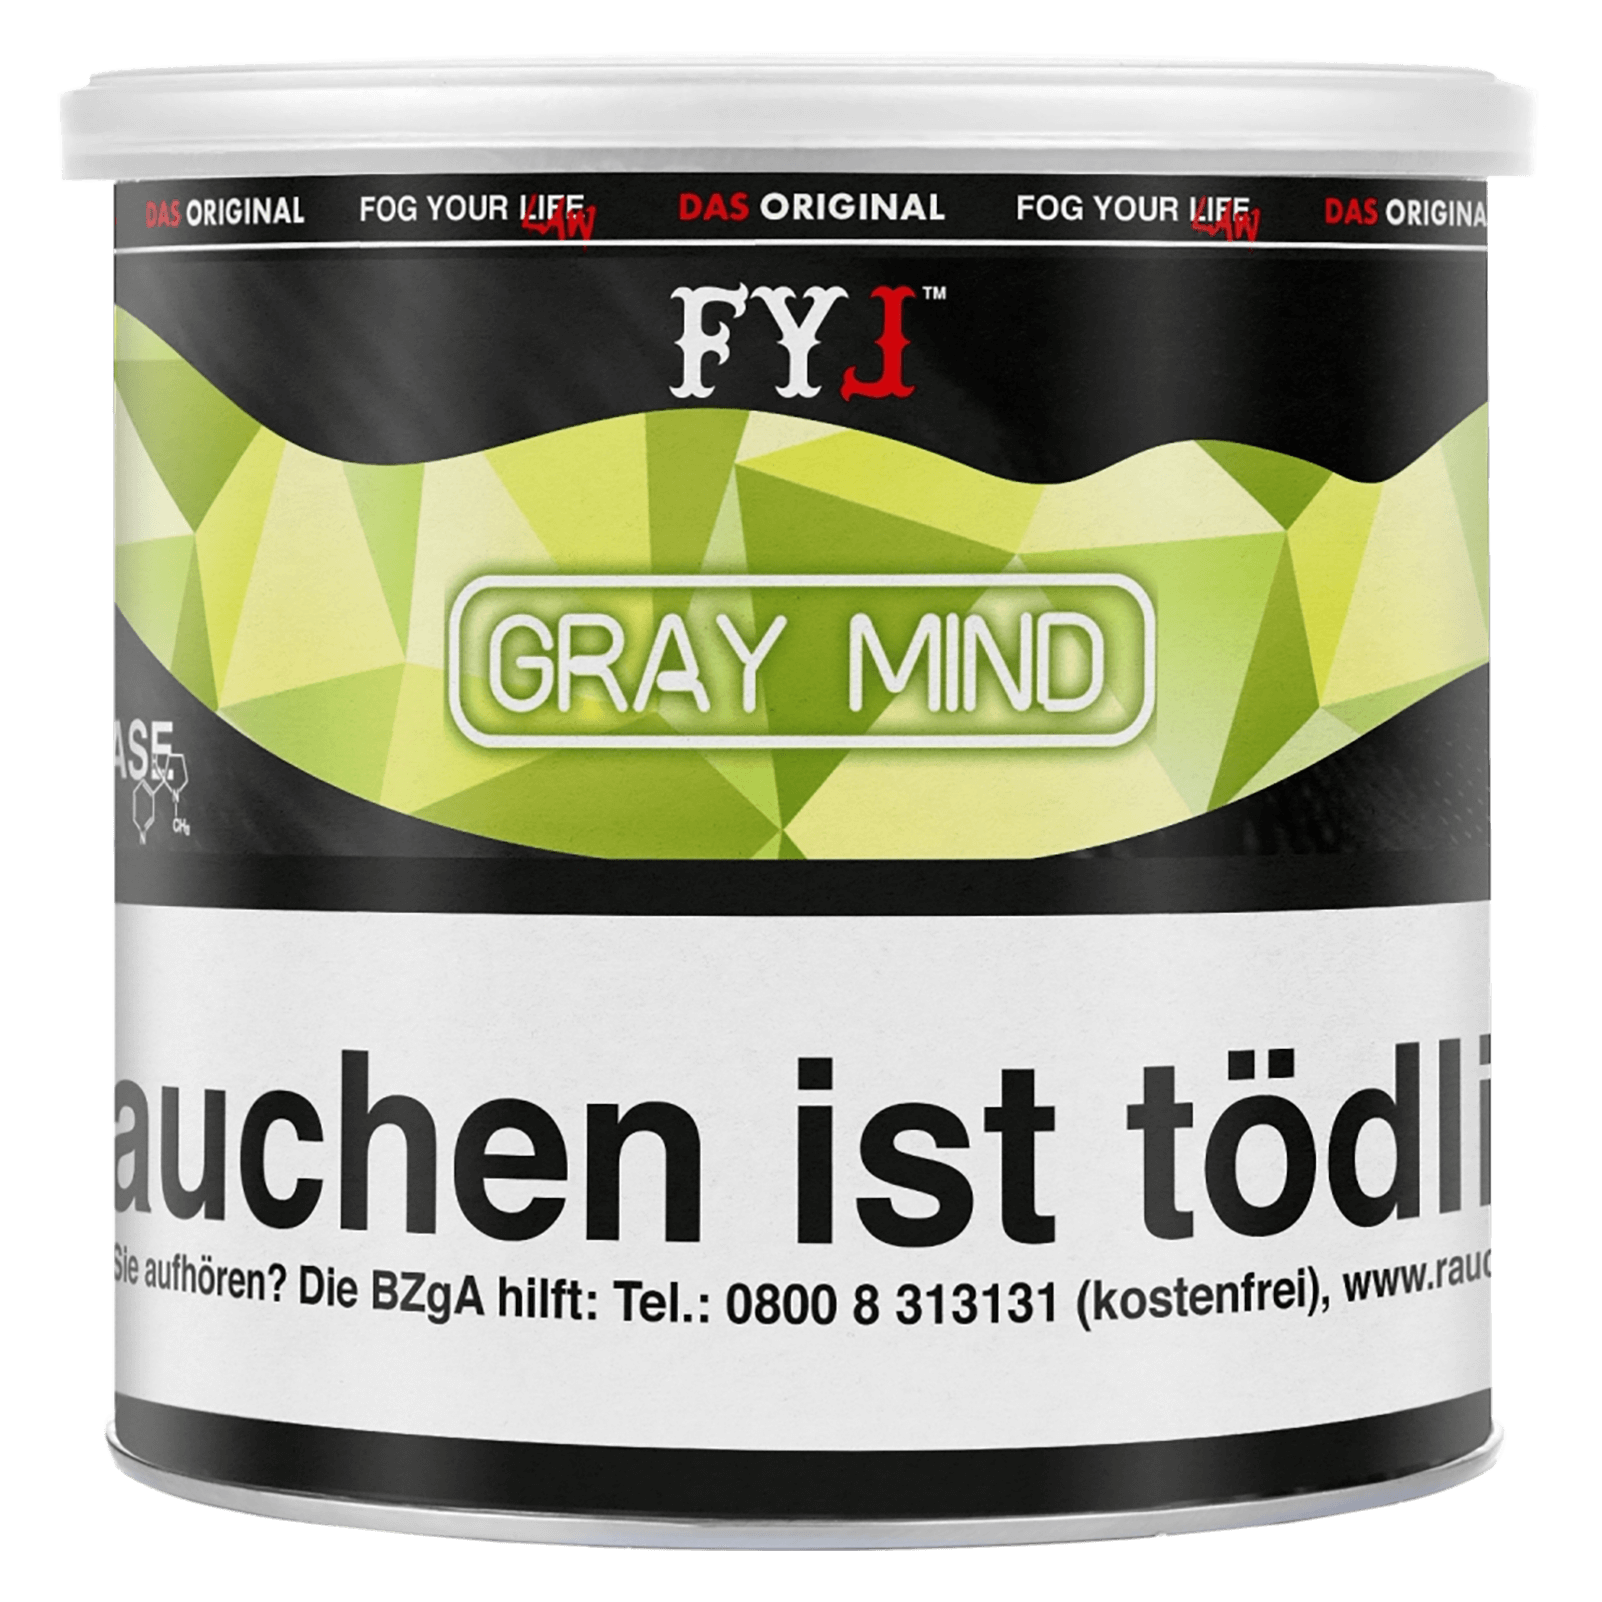 Fog Your Law 70g - Gray Mind